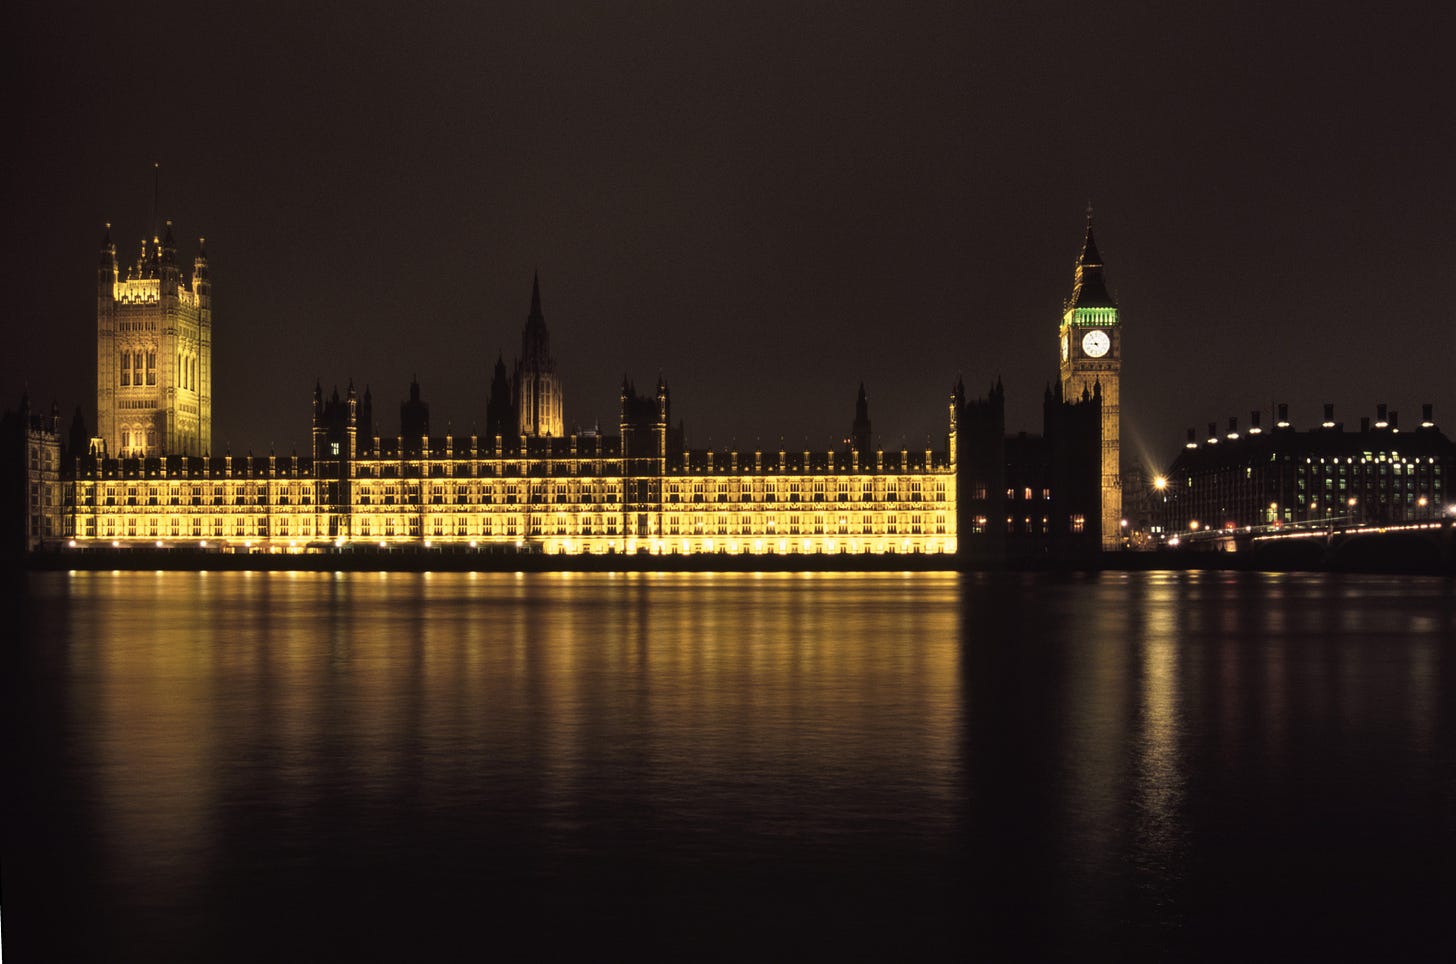 Palace of Westminster at night - Belgravia Books Collective